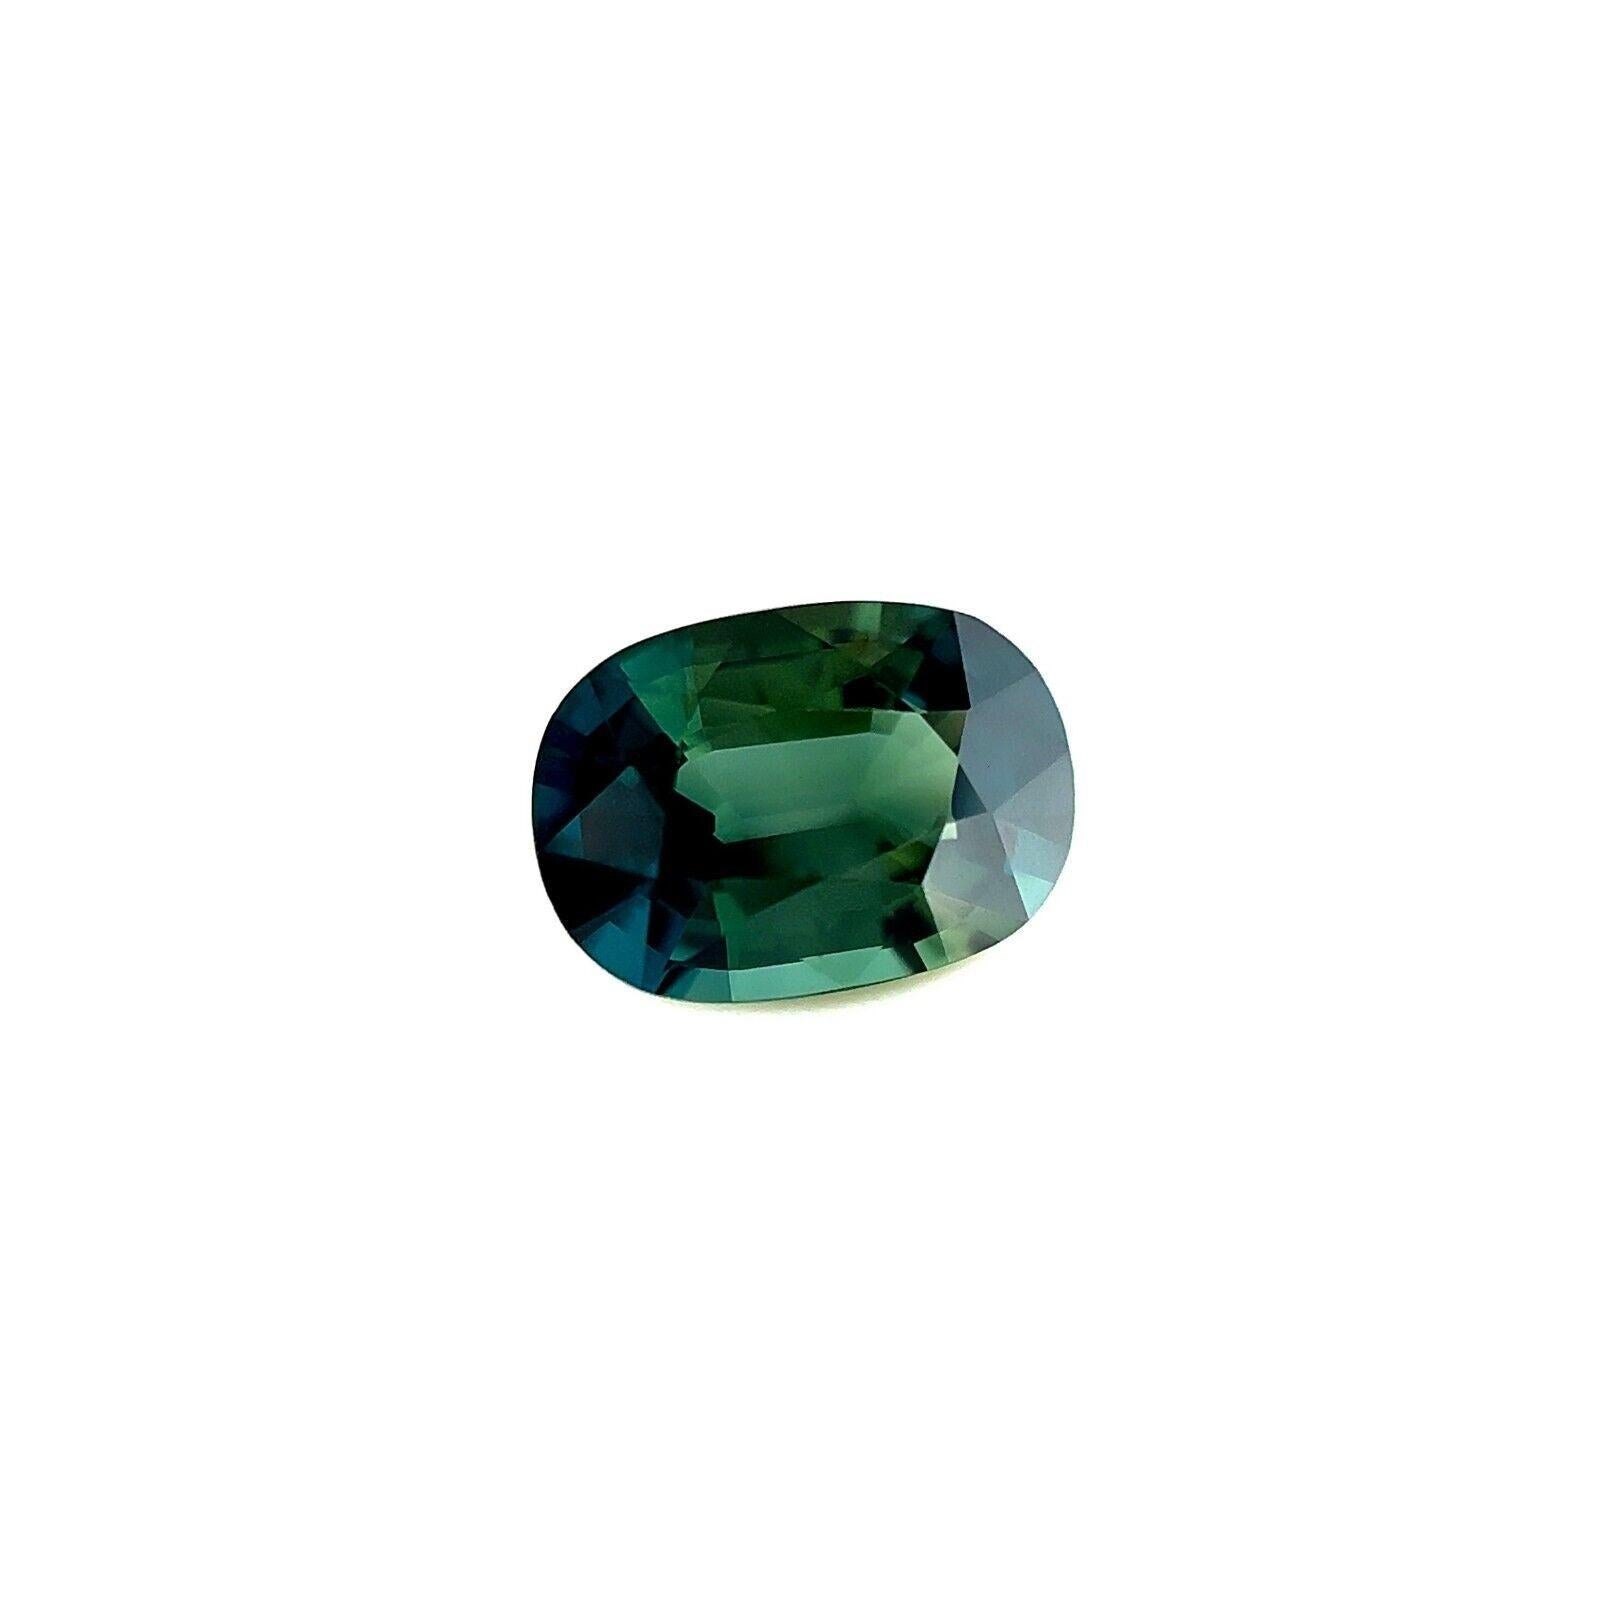 Rare 1.33Ct GIA Certified Green Blue Sapphire Untreated Cushion Cut 7.7x5.5mm

Natural Untreated Green Blue Colour Sapphire Gemstone.
1.33 Carat unheated unique green blue sapphire. Totally untreated and unheated, very rare for natural